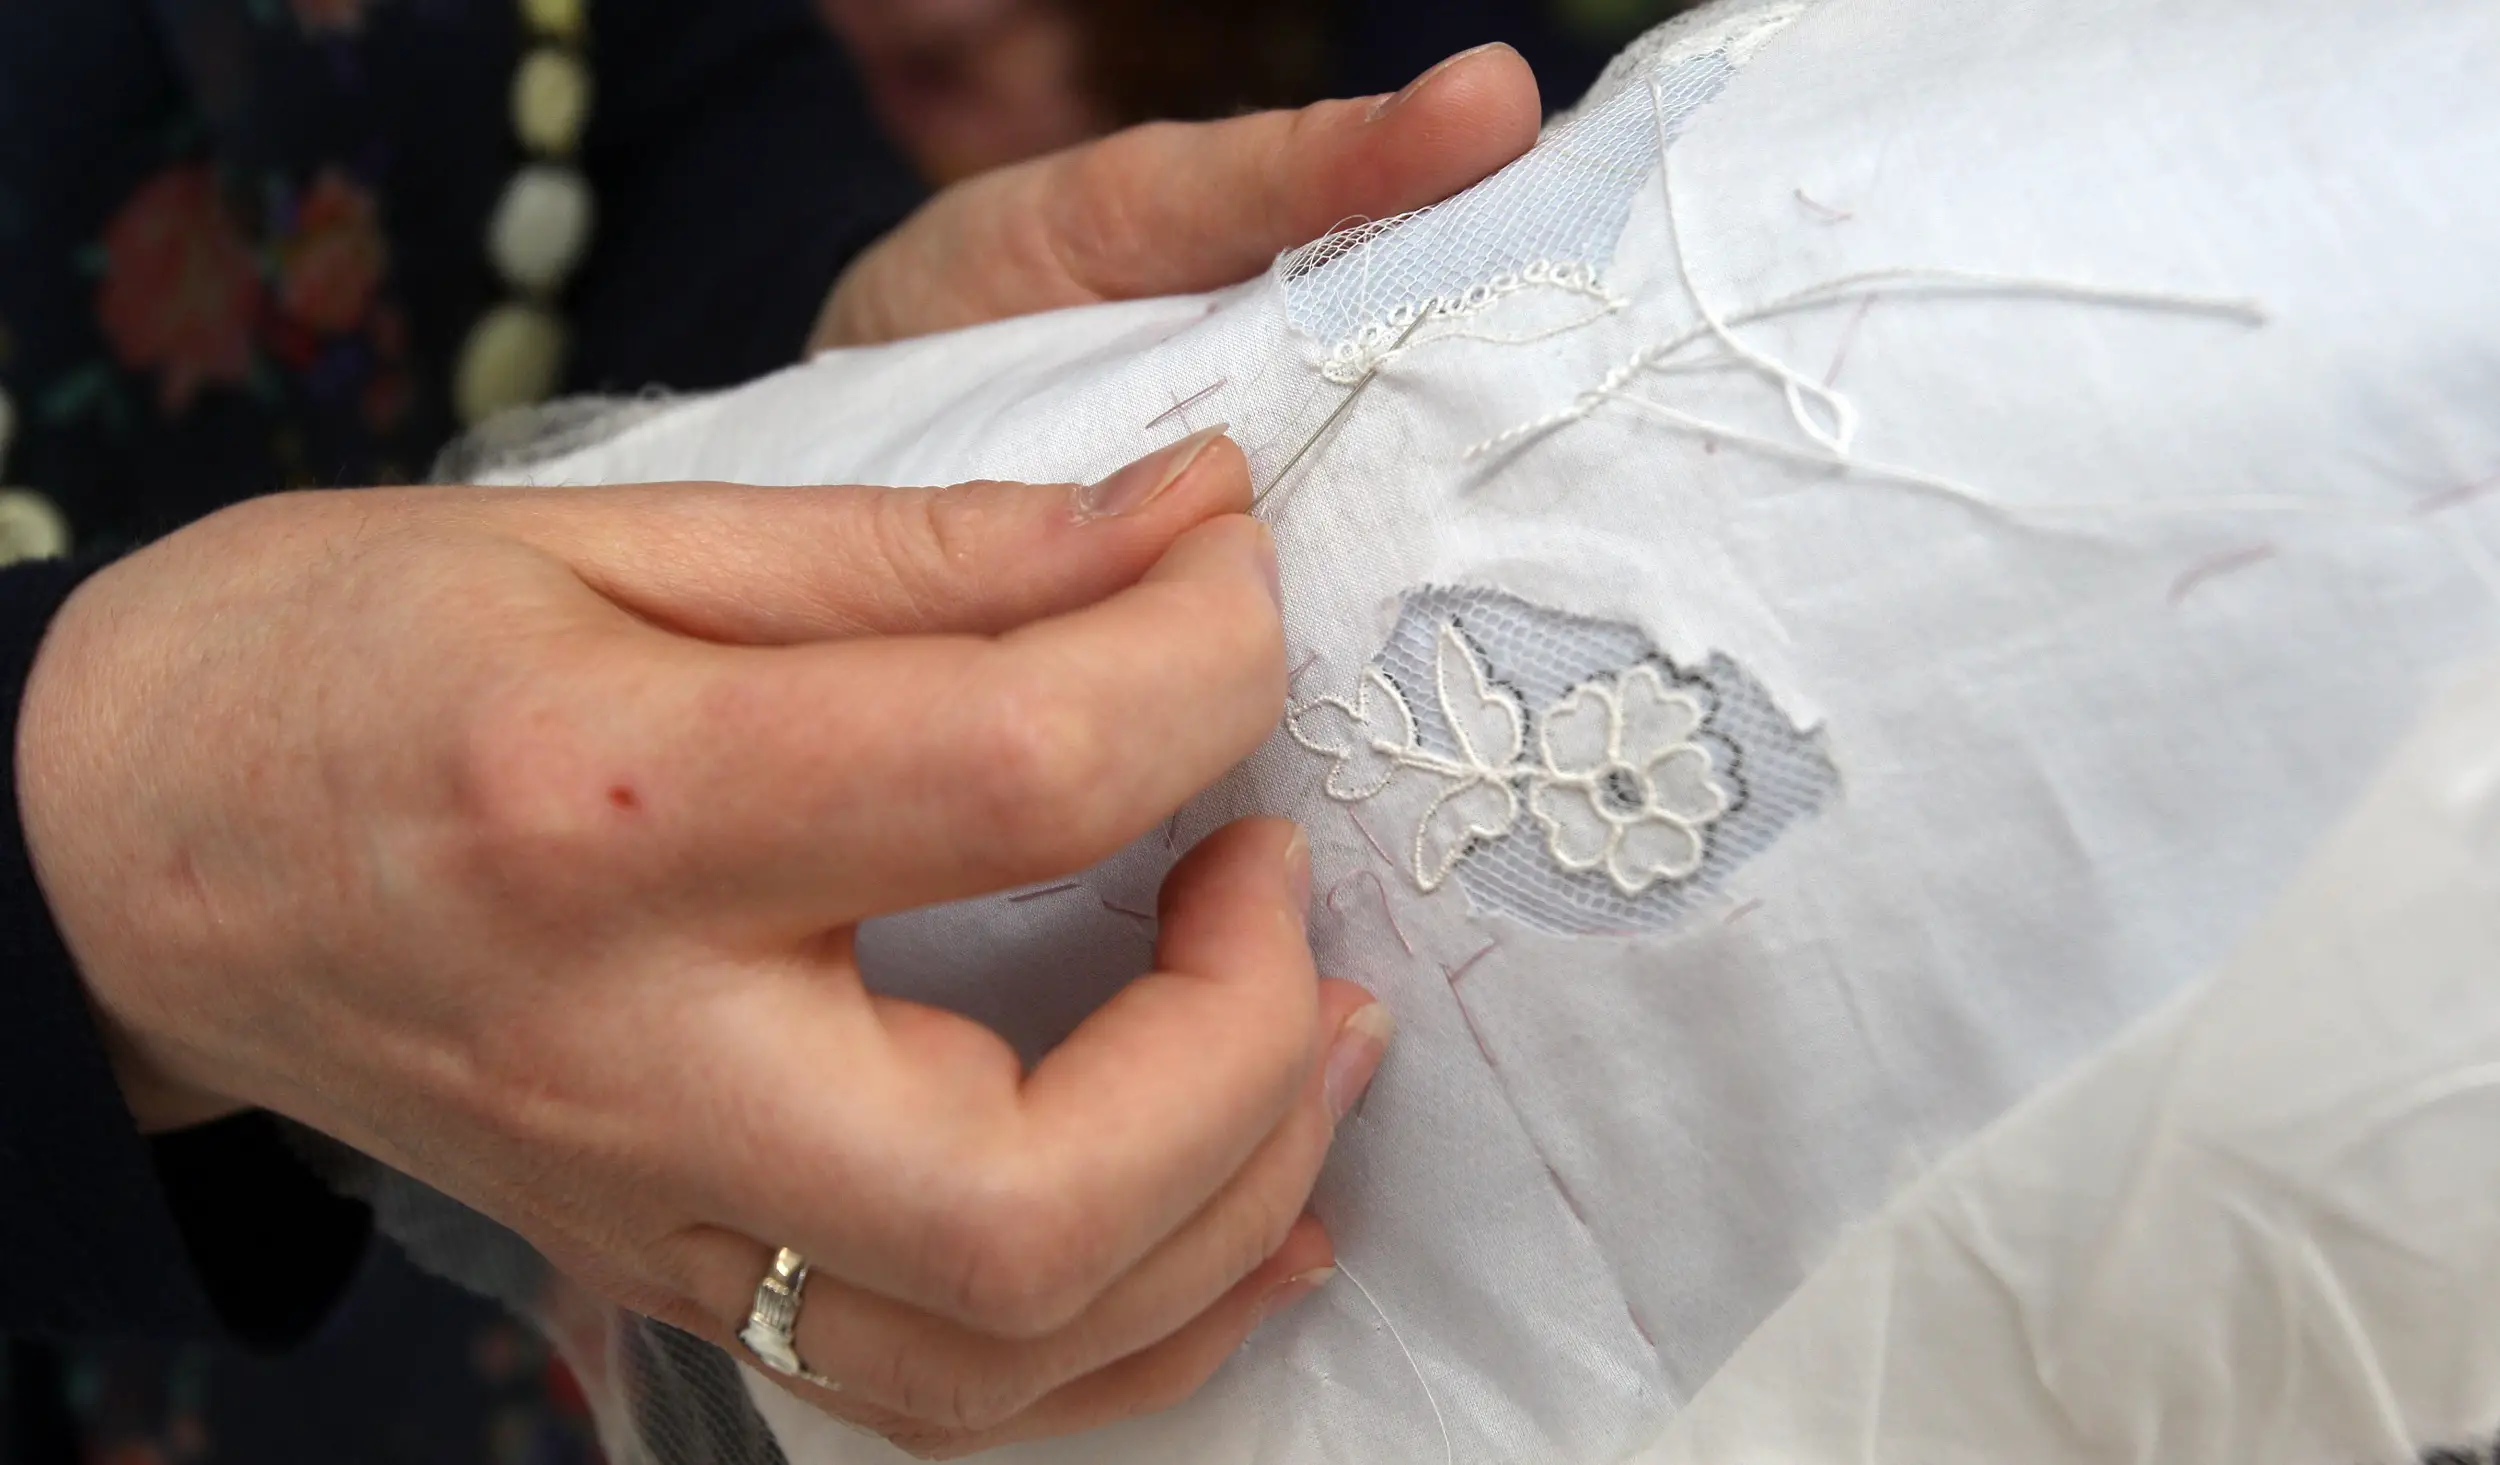 Jenny Adin-Christie, 33, an embroiderer from Chessington, who worked on the Duchess of Cambridge's Wedding Dress, demonstrates the applique embroidery technique similar, but not the same as that used on the Wedding Dress, at the Royal School of Needlework in Hampton Court Palace, South West London.